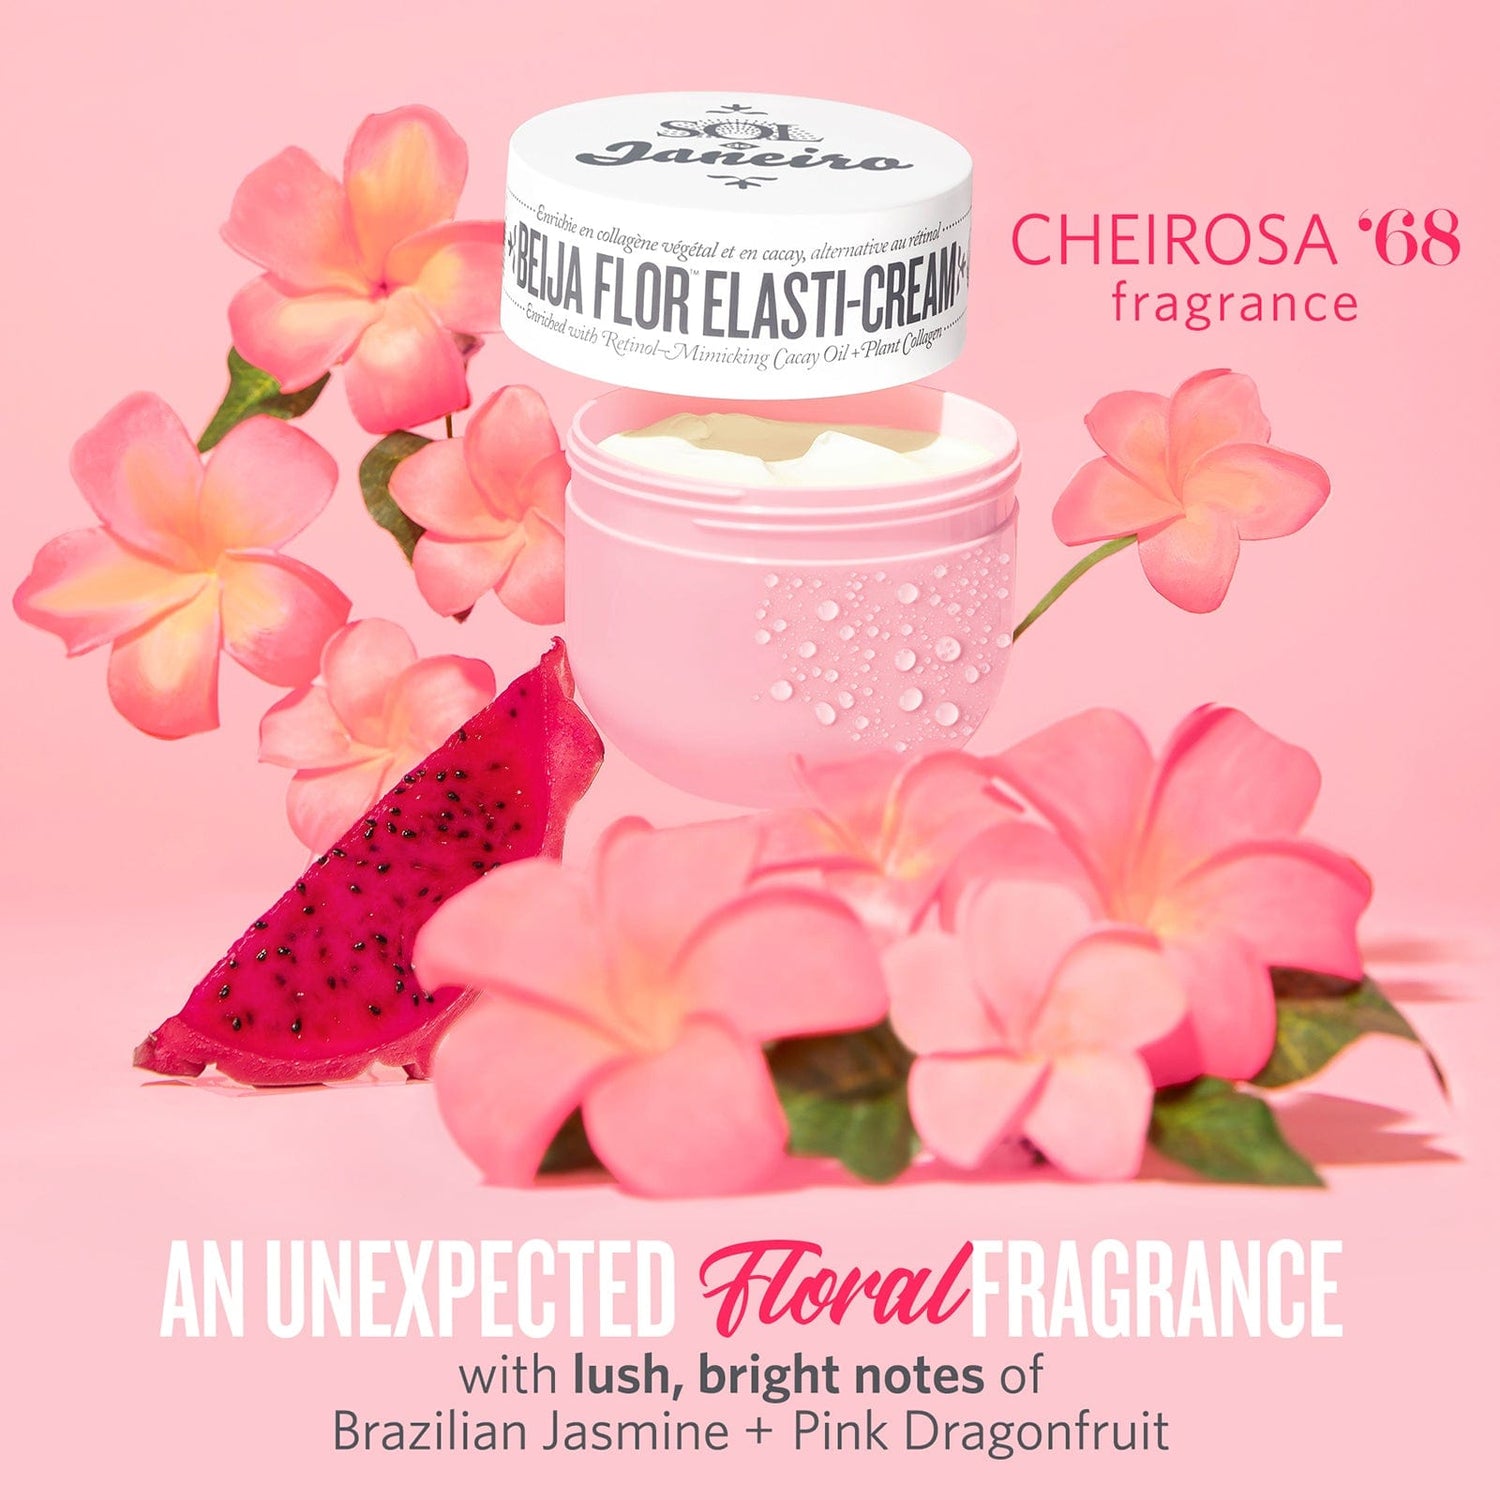 Cheirosa 68 Fragrance - an unexpected floral fragrance with lush, bright notes of Brazilian Jasmine + Pink Dragonfruit